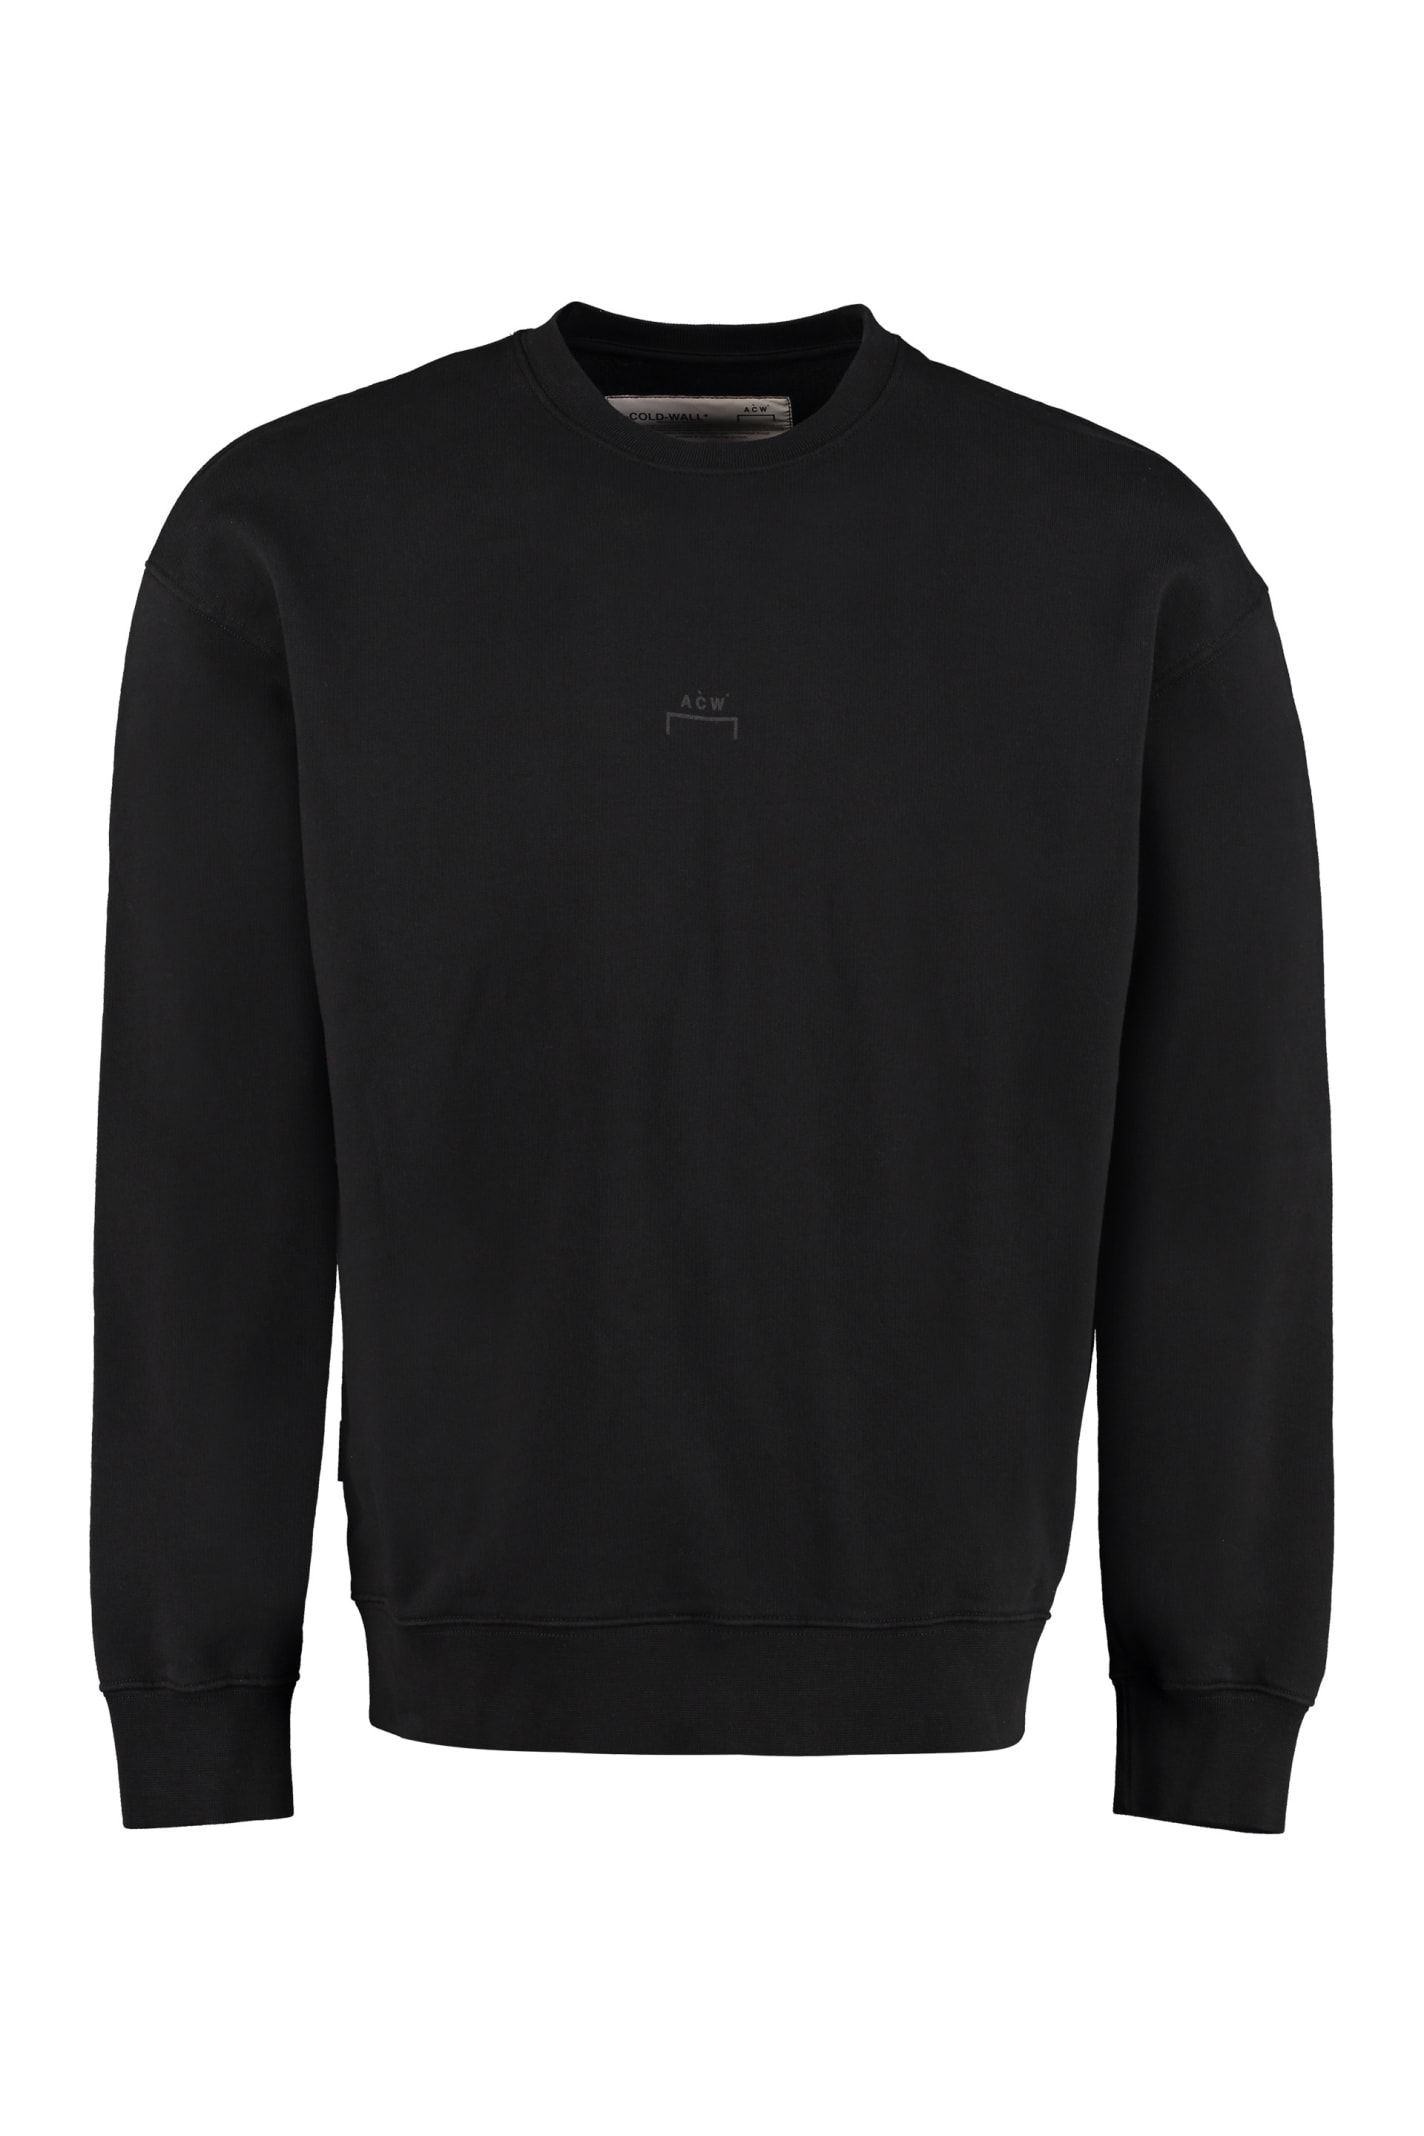 A-COLD-WALL* Sweaters for Men | ModeSens